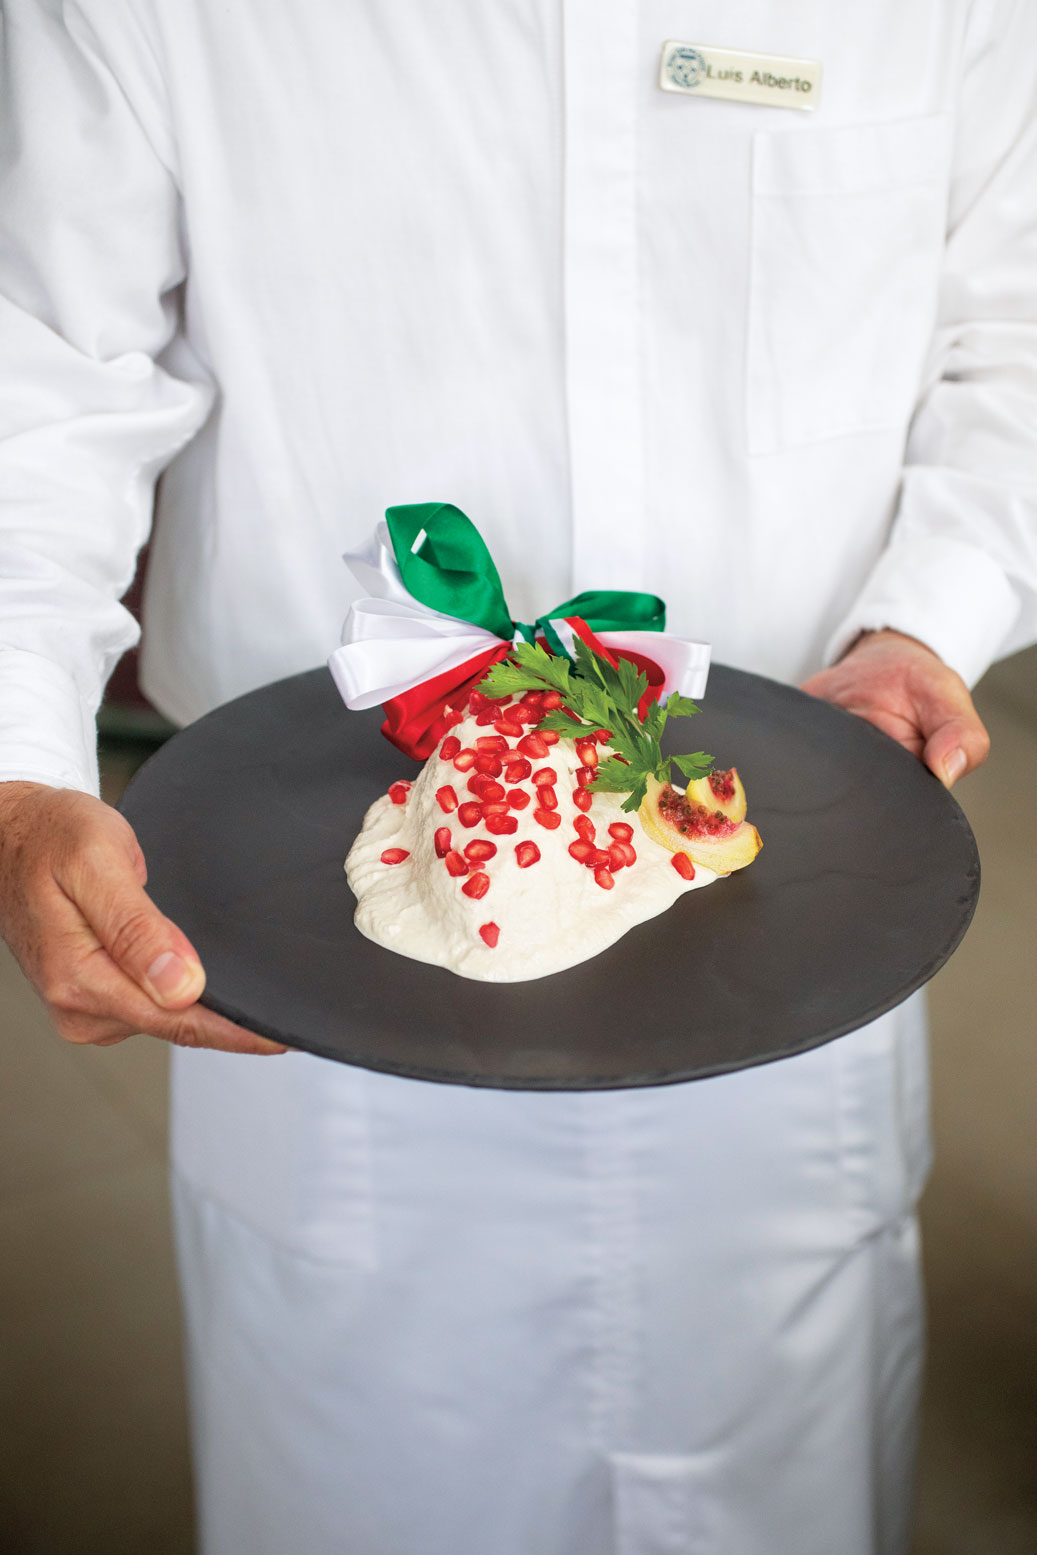 A server holding an ice dessert with fruits on a black plate.